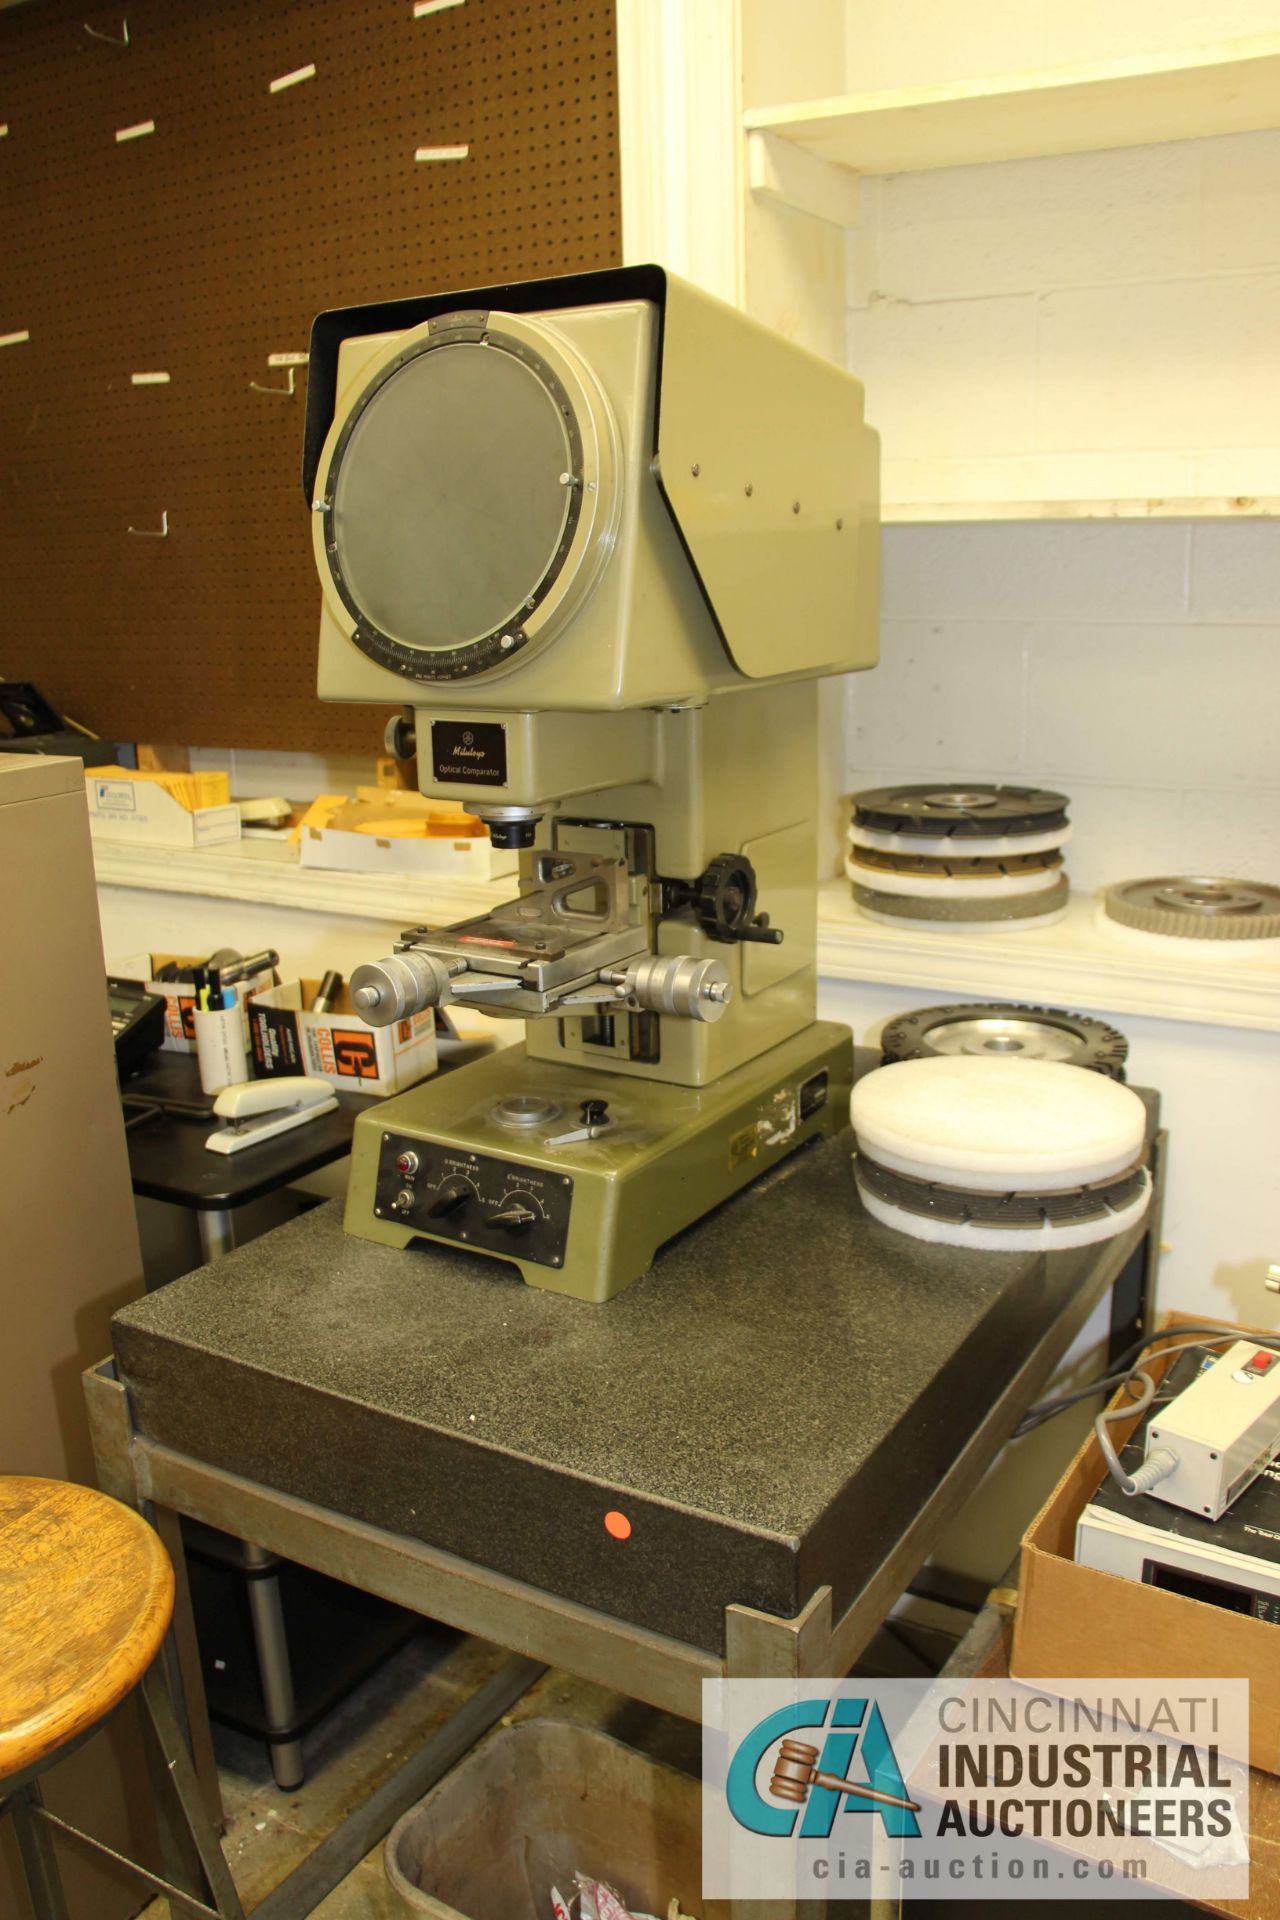 9" MITUTOYO MODEL PJ-250B OPTICAL COMPARATOR - $10.00 Rigging Fee Due to Onsite Rigger - Located